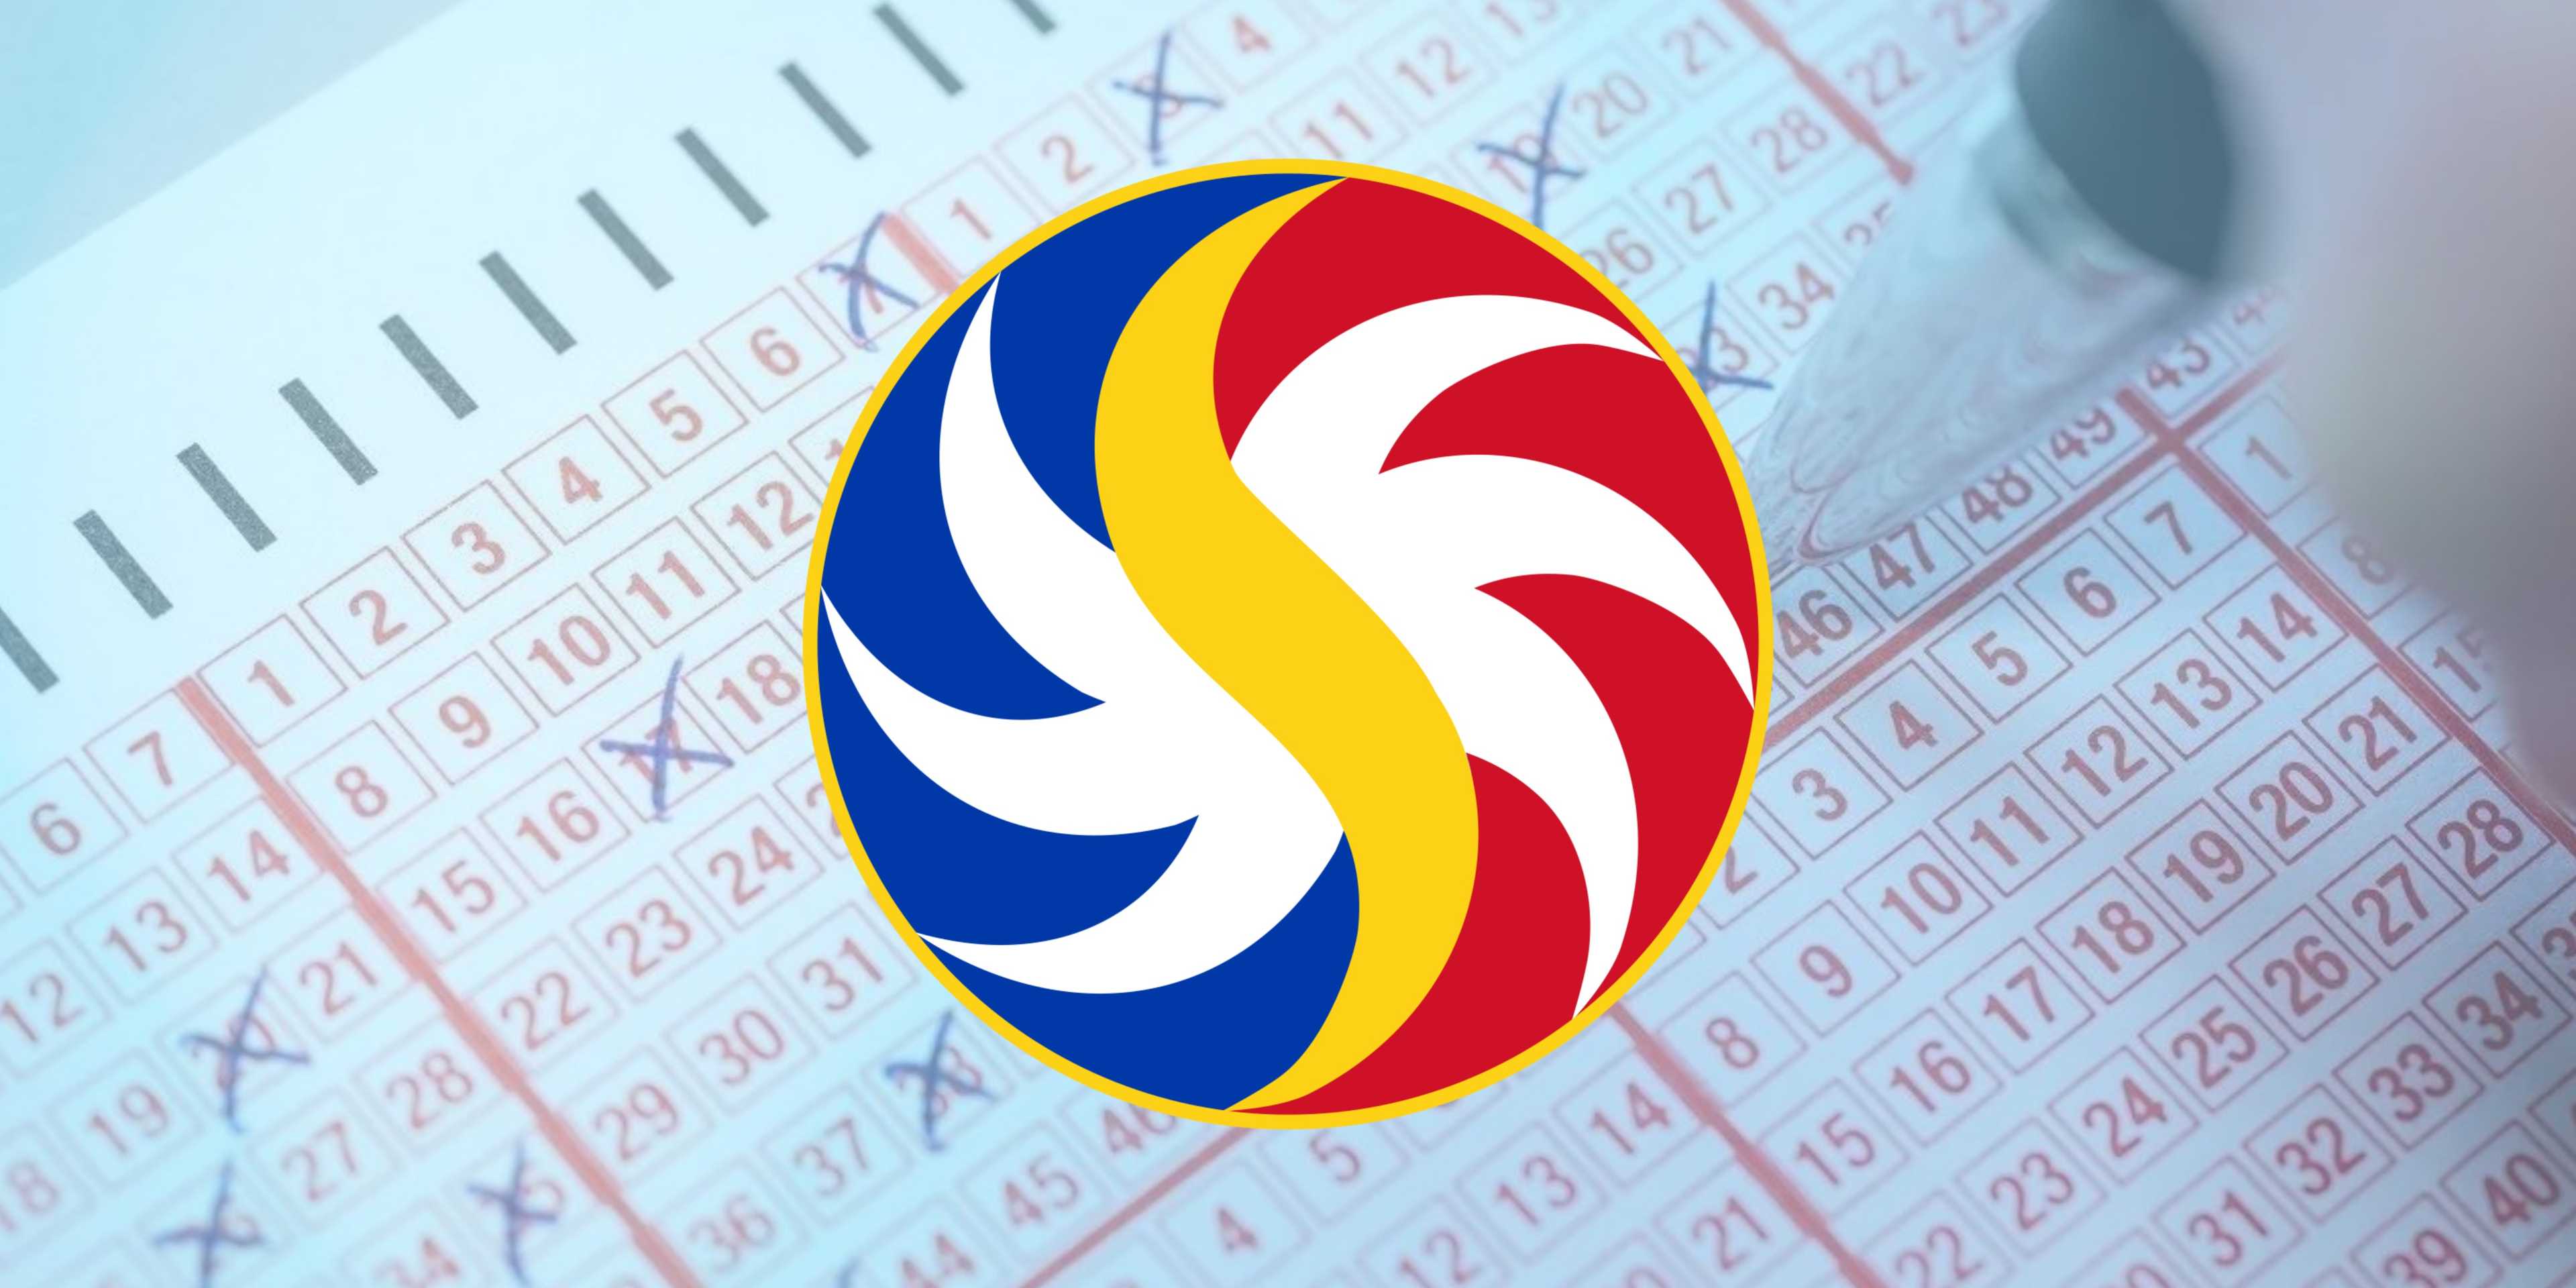 PCSO Lotto Draw Results on Friday, March 15